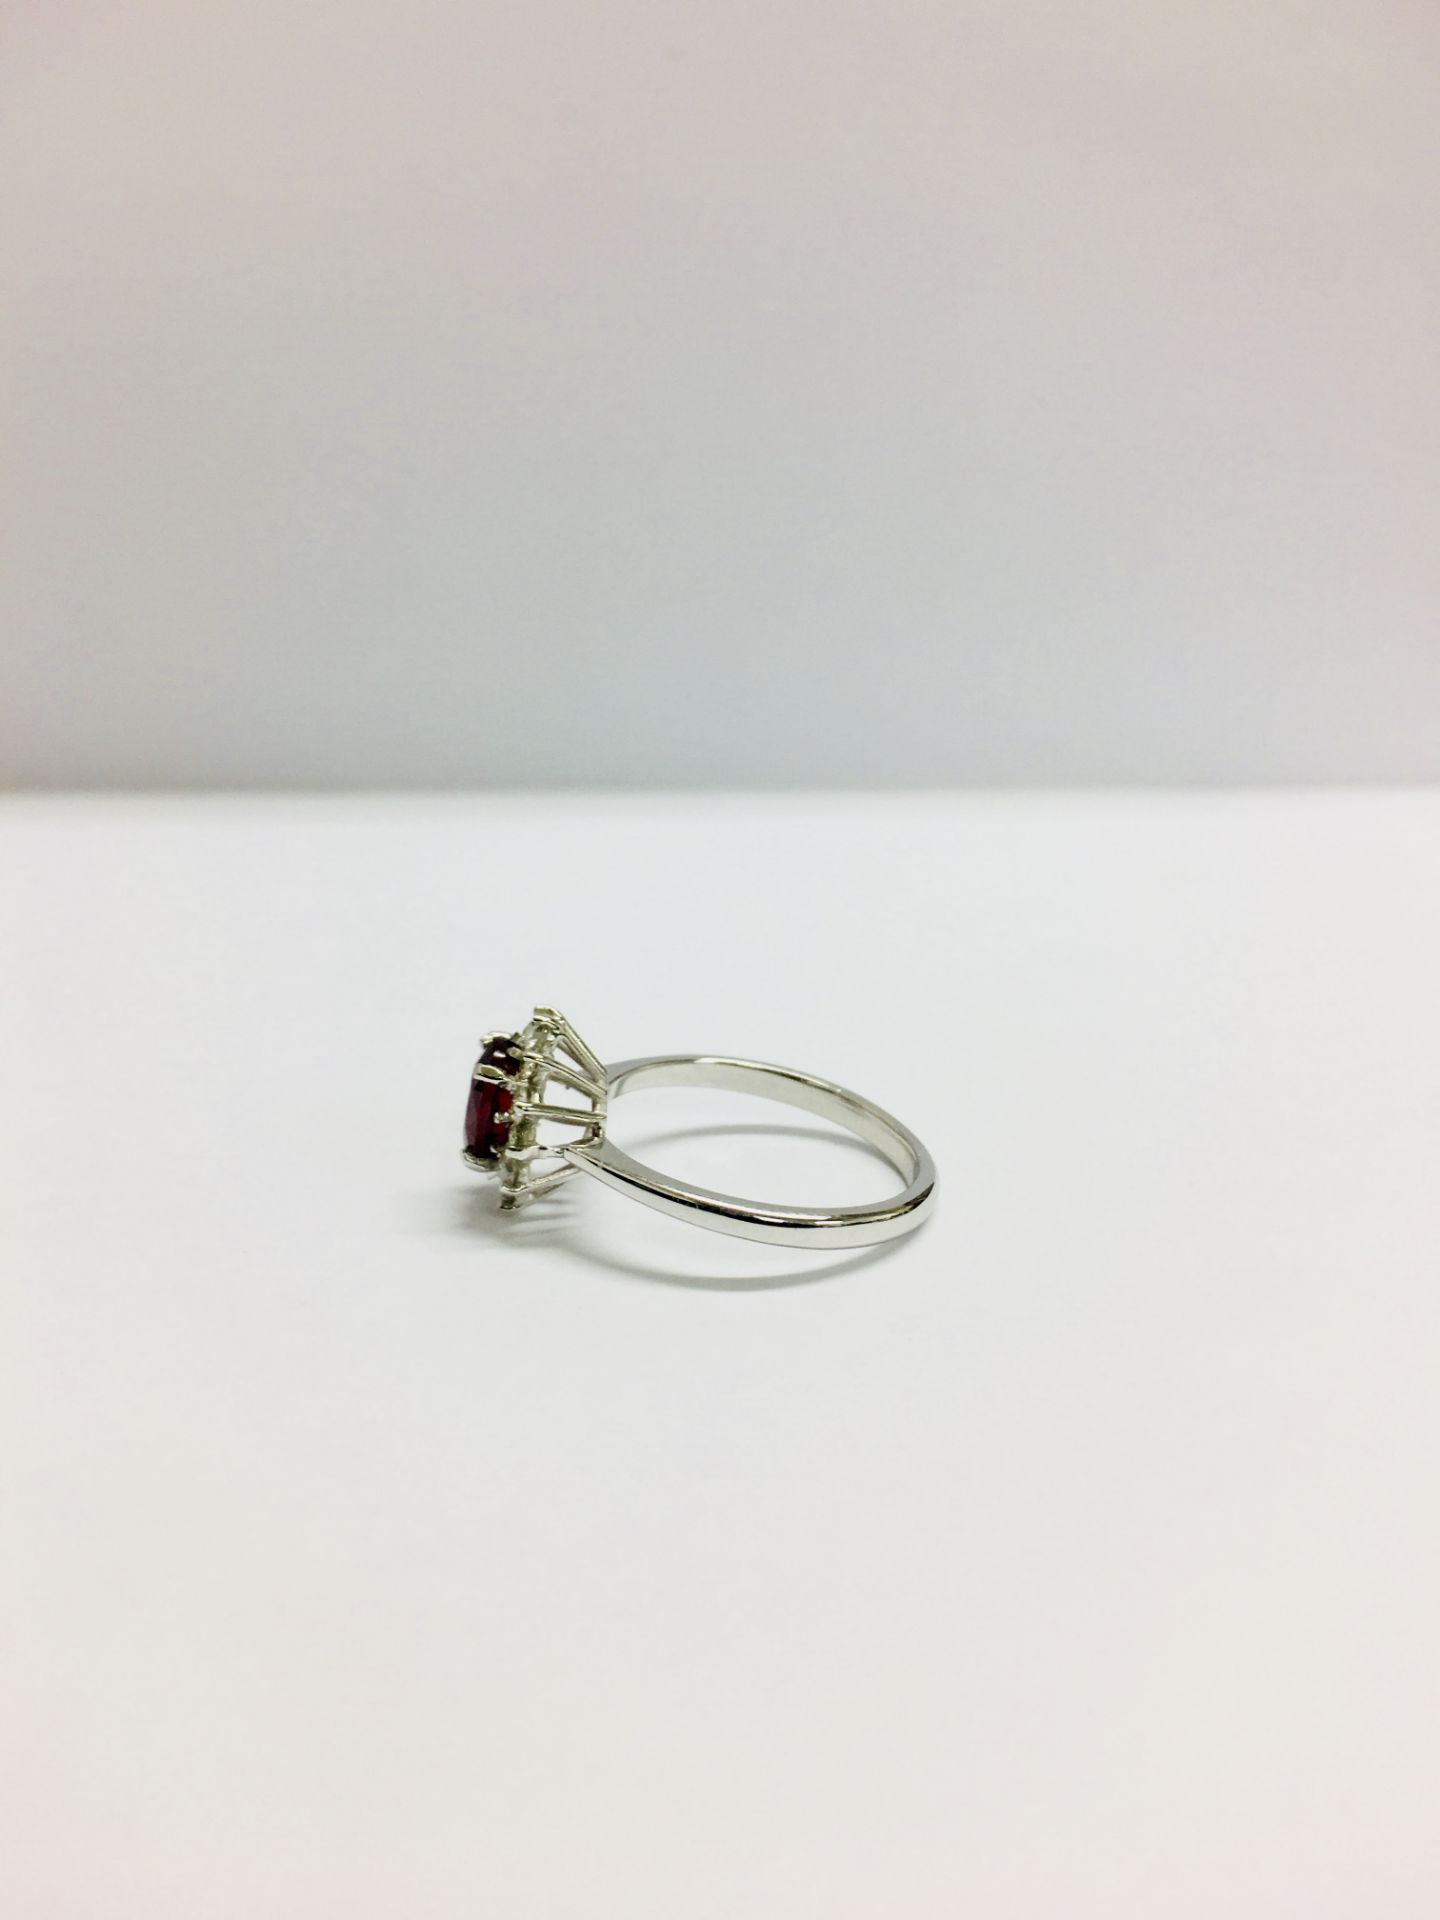 0.80ct Ruby and diamond cluster ring set with a oval cut(glass filled) ruby which is surrounded by - Image 2 of 5